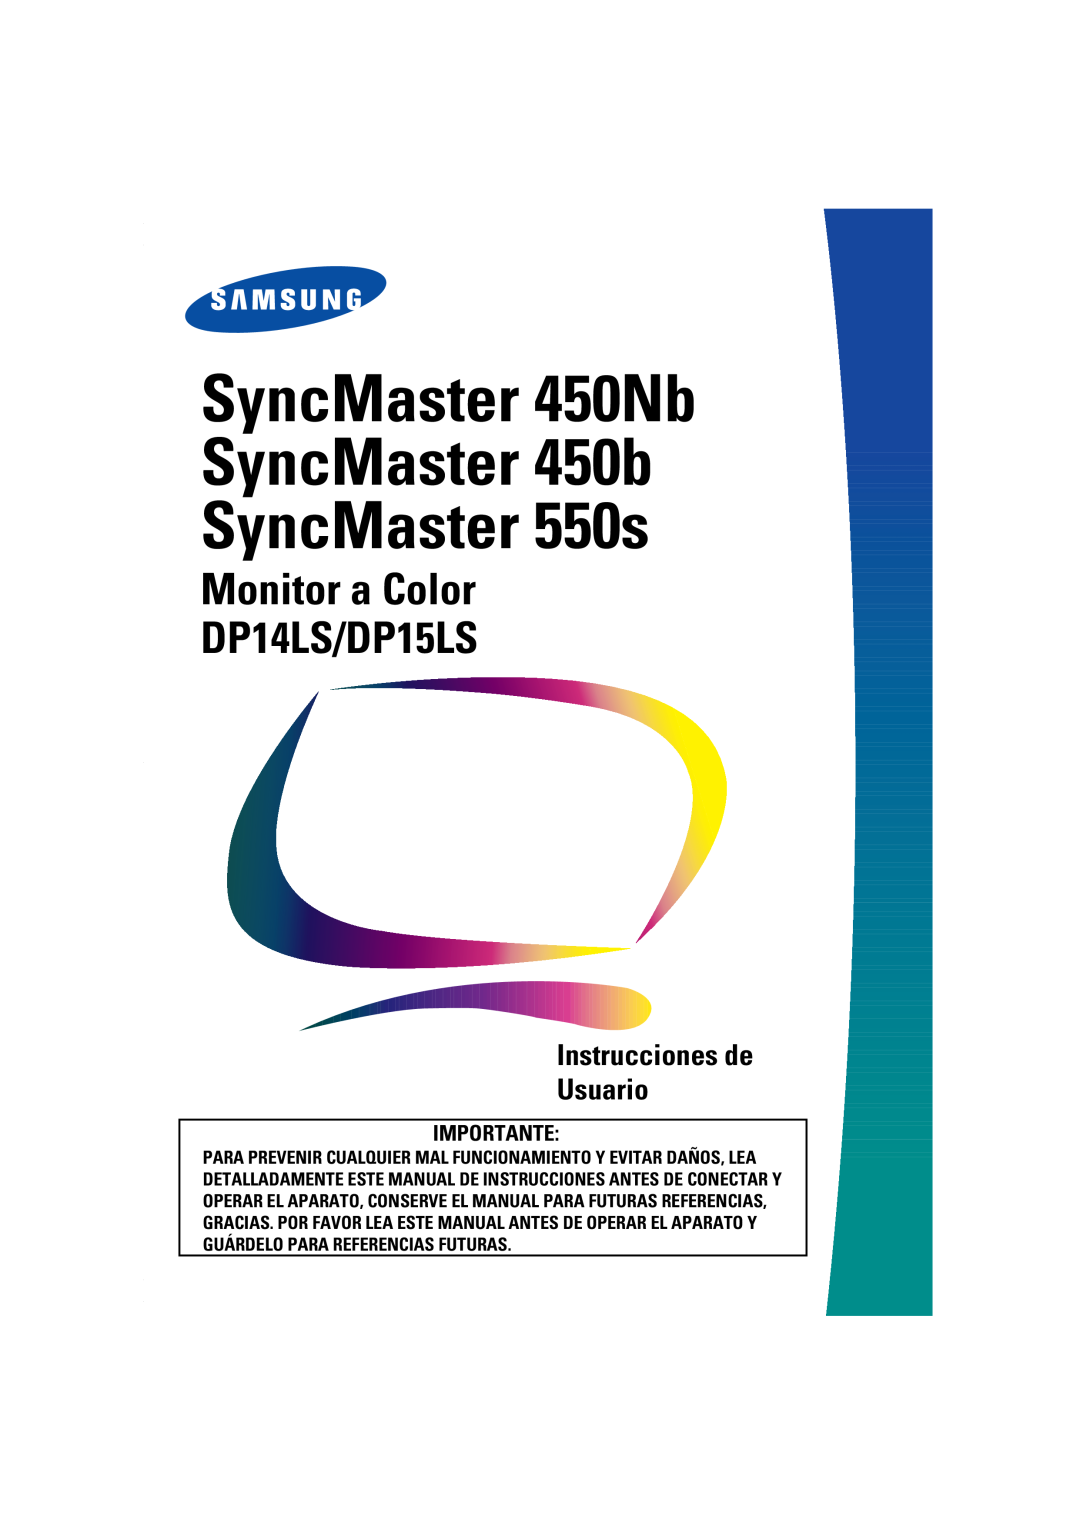 Samsung manual Importante, SyncMaster 450Nb SyncMaster 450b SyncMaster 550s, Monitor a Color DP14LS/DP15LS 